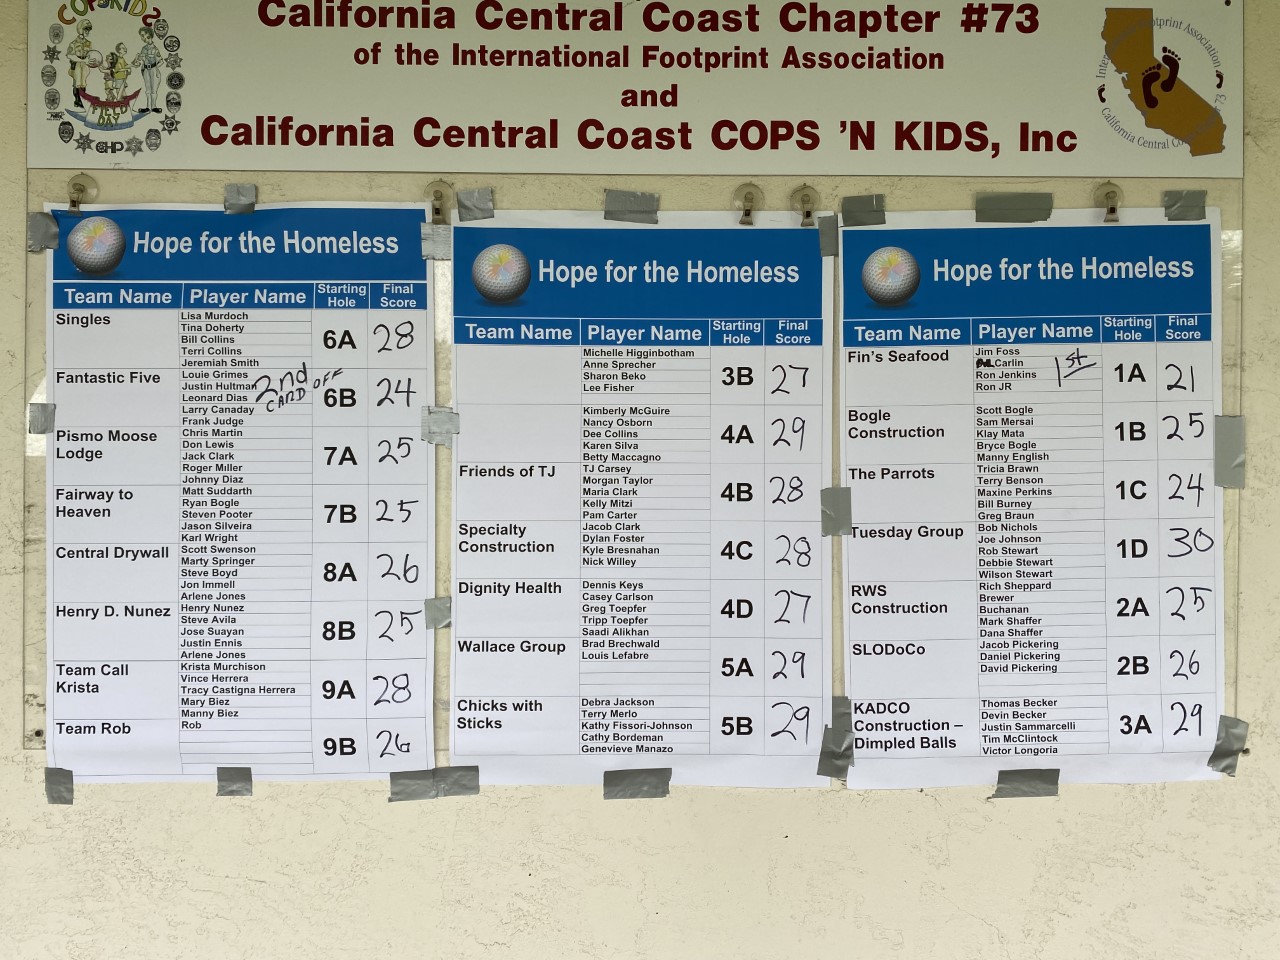 A score roster showing the winner and runners up of the golf tournament.